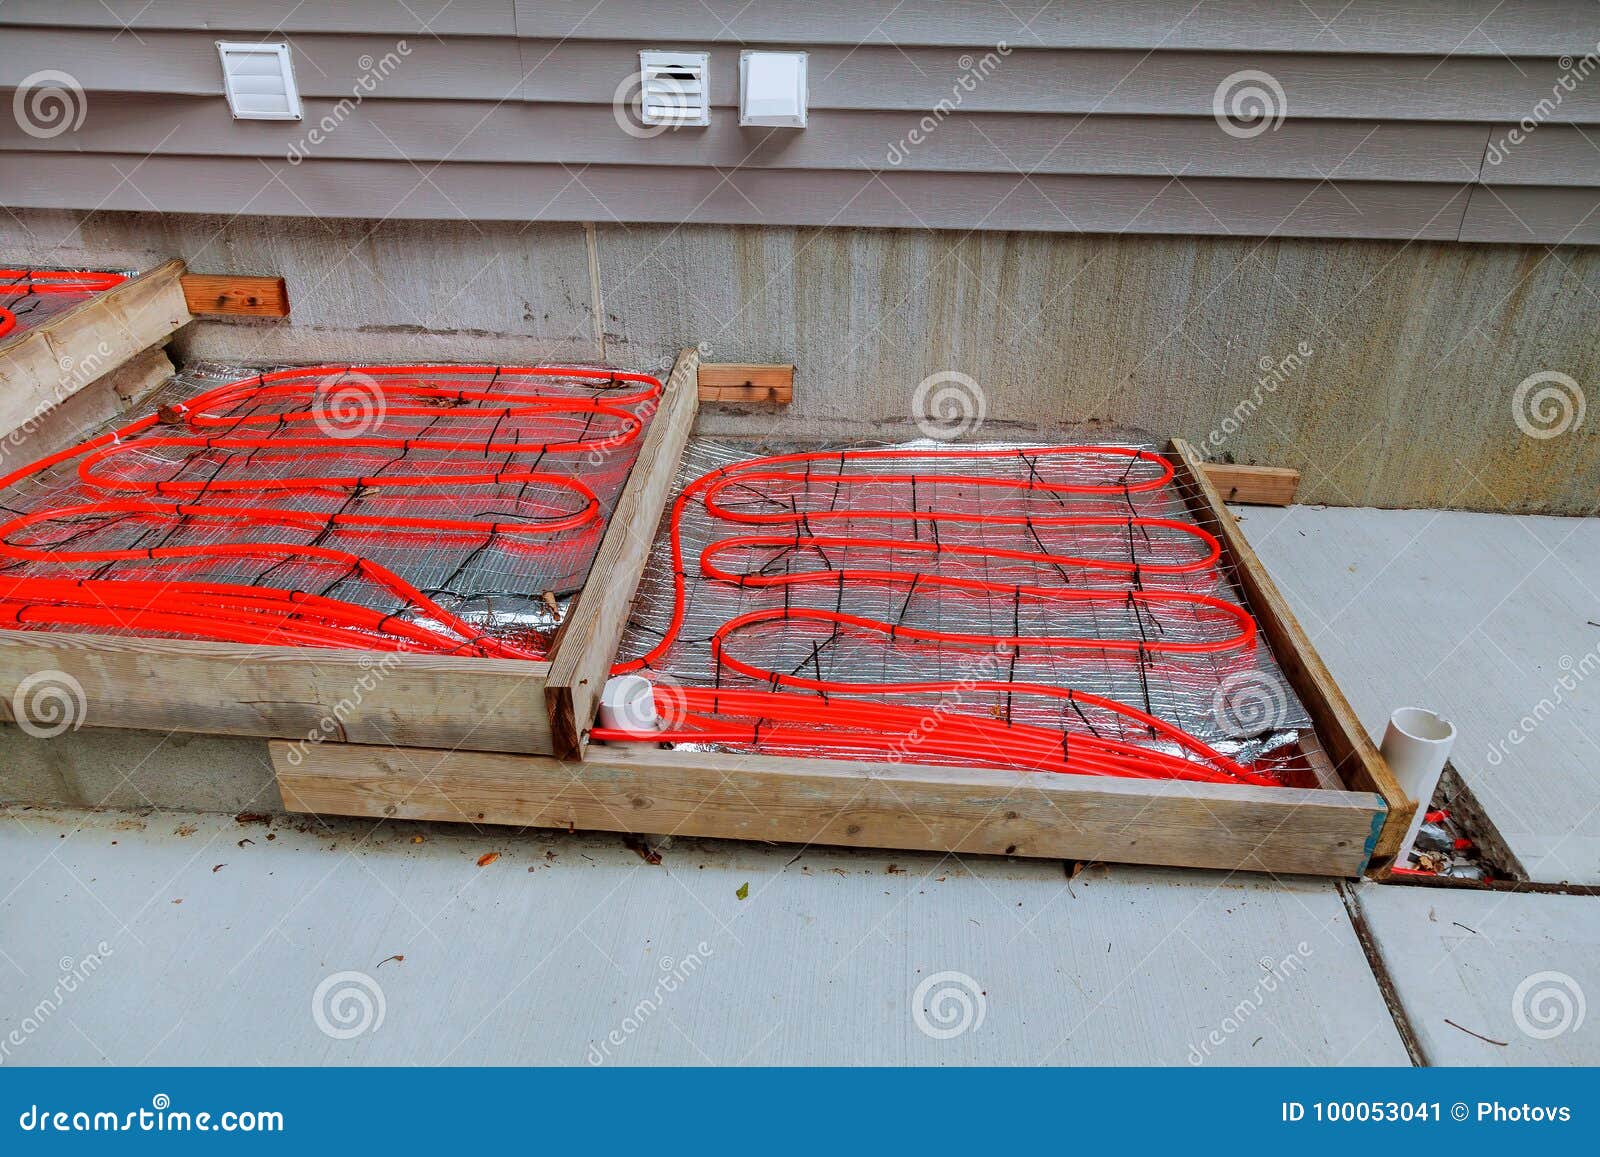 Outdoor Radiant Heating For Concrete Stock Image Image Of Floor